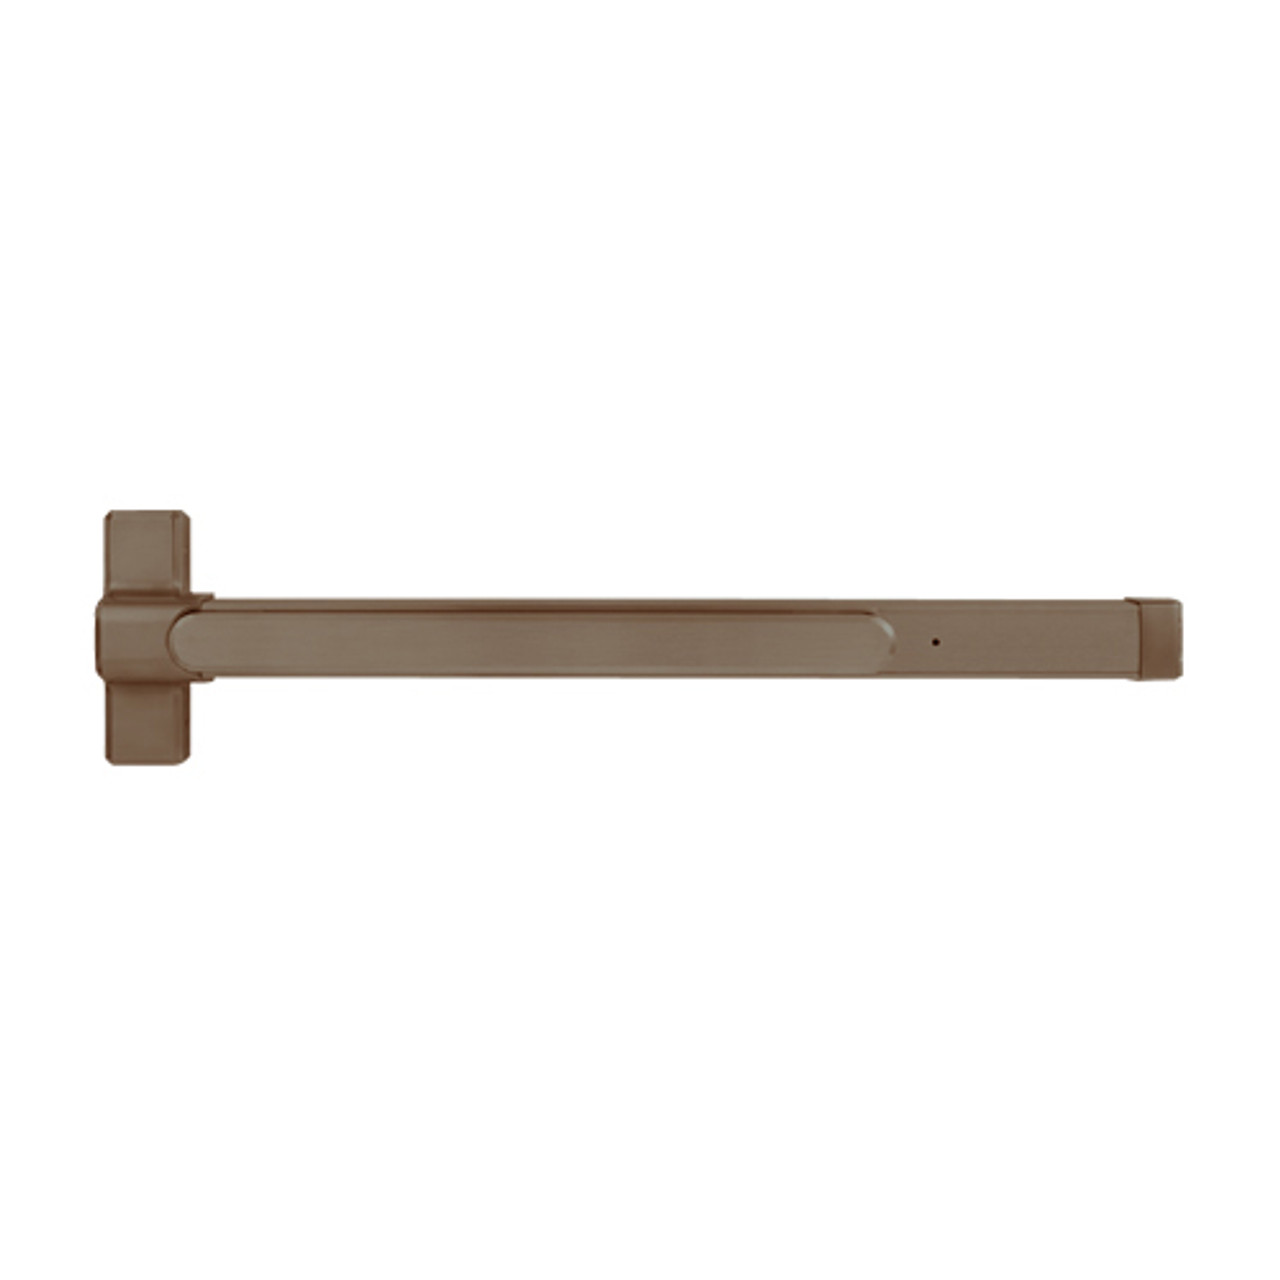 QED127X-36-7-313AN Stanley QED100 Series Heavy Duty Concealed Vertical Rod Hex Dog Exit Device in Anodized Duranodic Bronze Finish